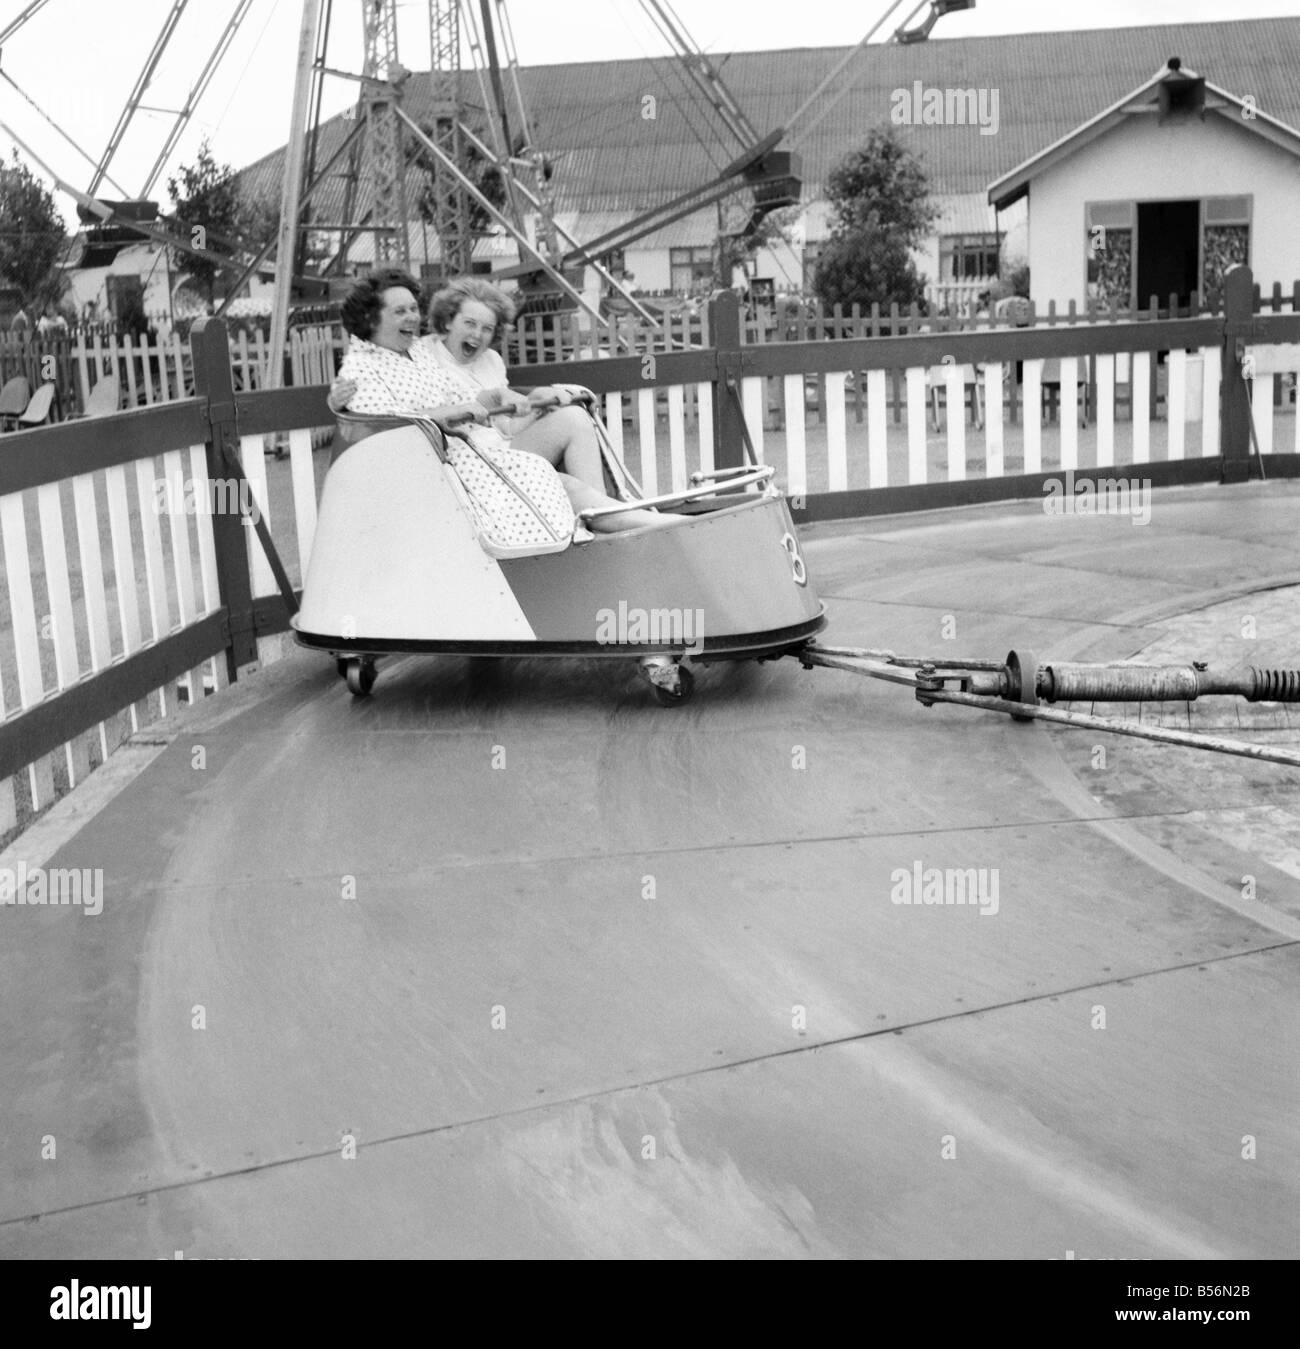 Bultins Holiday Pwllheli: Mrs. Nellie McGrail, Pools Winner. Horse riding/Boating/Elephant/Roller skating/Family. At the Funfare - Mrs. McGrail and Barbara. June 1960 M4480-022 Stock Photo